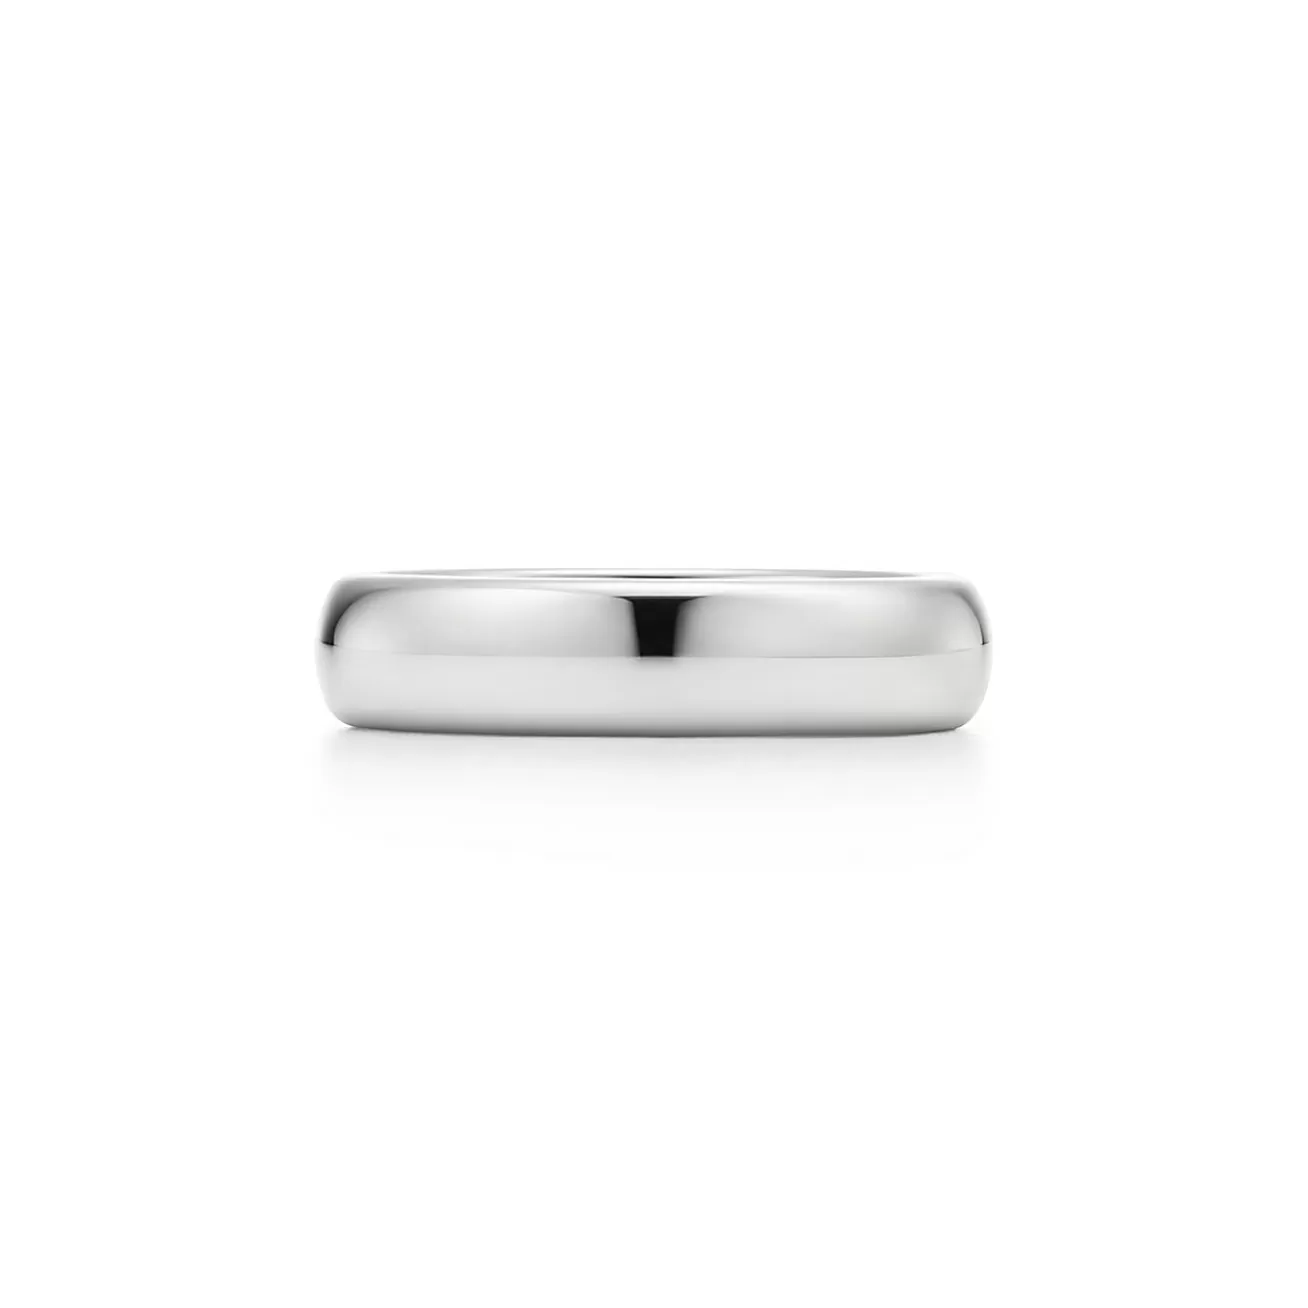 Tiffany & Co. Tiffany Forever Wedding Band Ring in Platinum, 4.5 mm Wide | ^ Rings | Platinum Jewelry